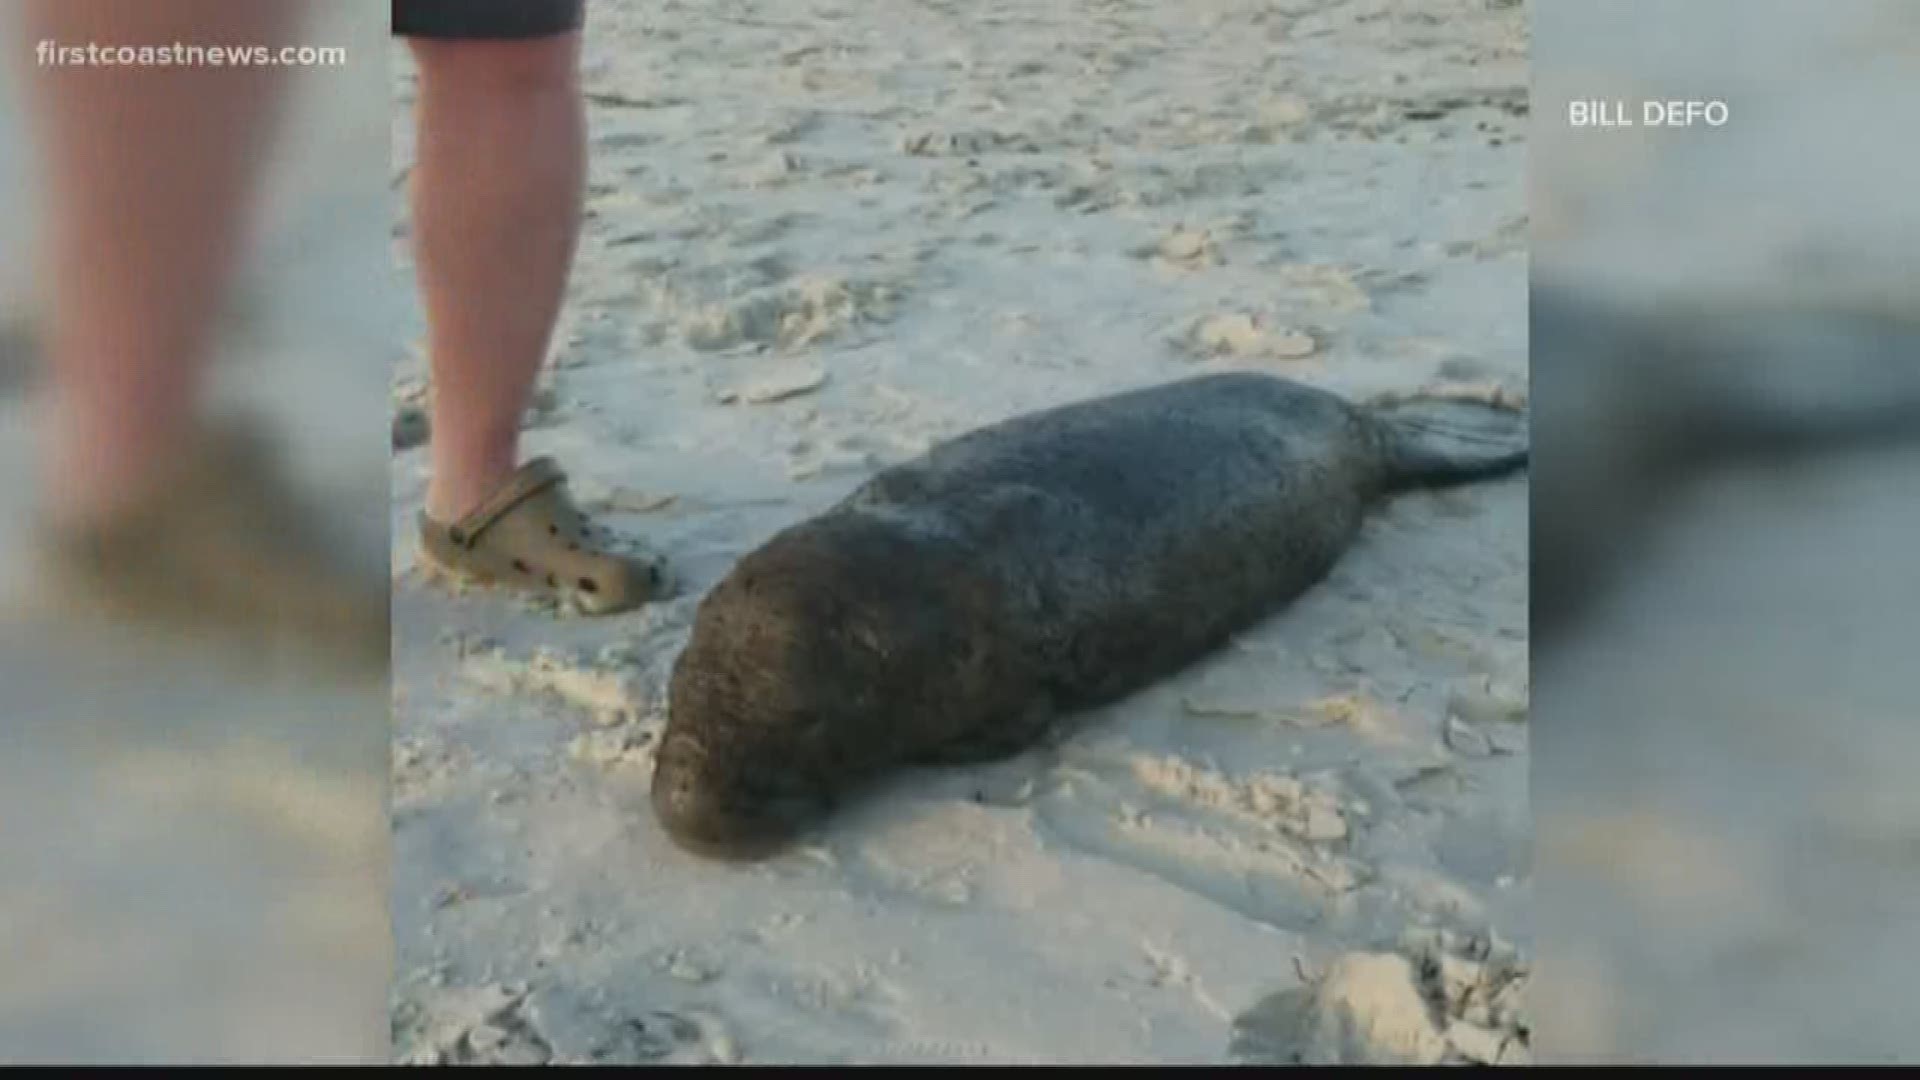 A young manatee calf was rescued Monday after washing up onto St. Augustine Beach, according to the Florida Fish and Wildlife Conservation Commission.